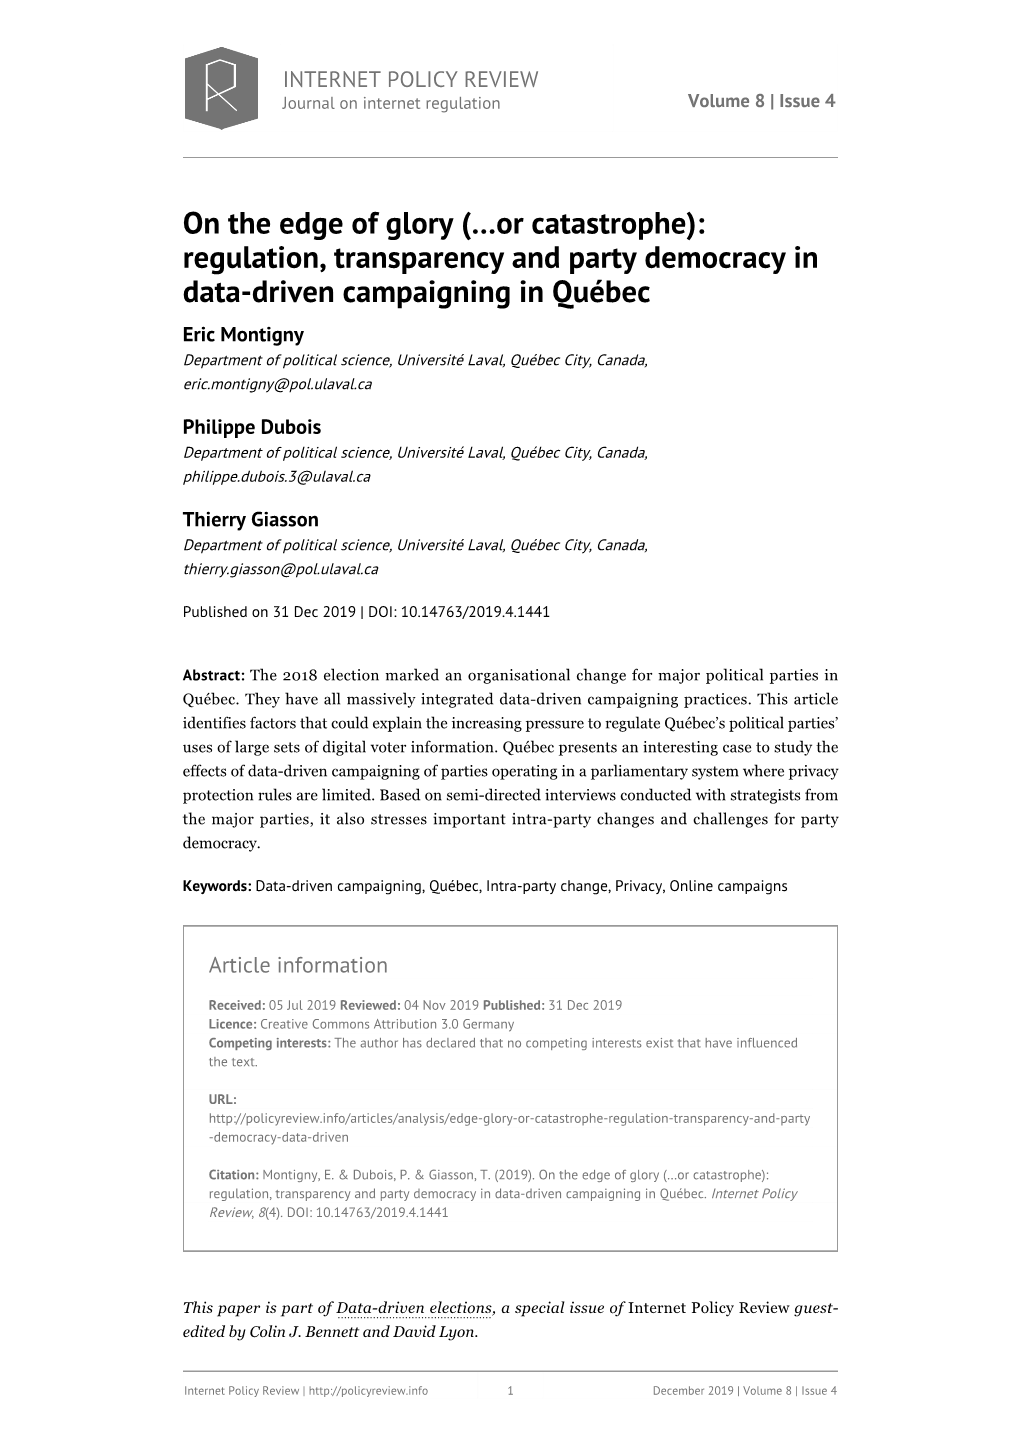 Regulation, Transparency and Party Democracy in Data-Driven